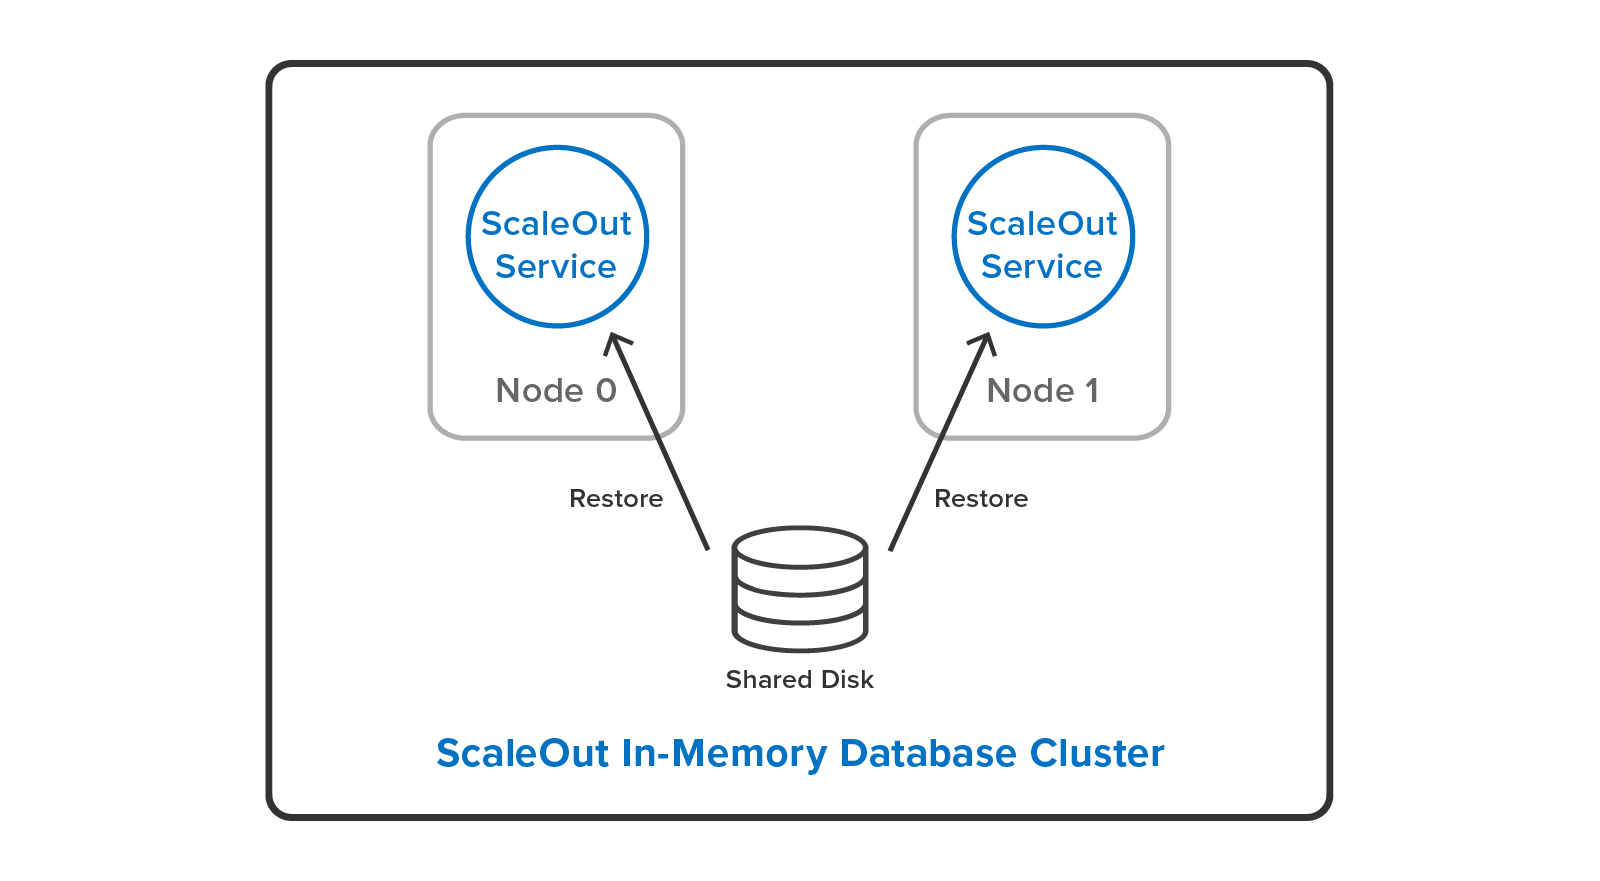 ScaleOut In-Memory Database can restore a backup to a different cluster configuration.